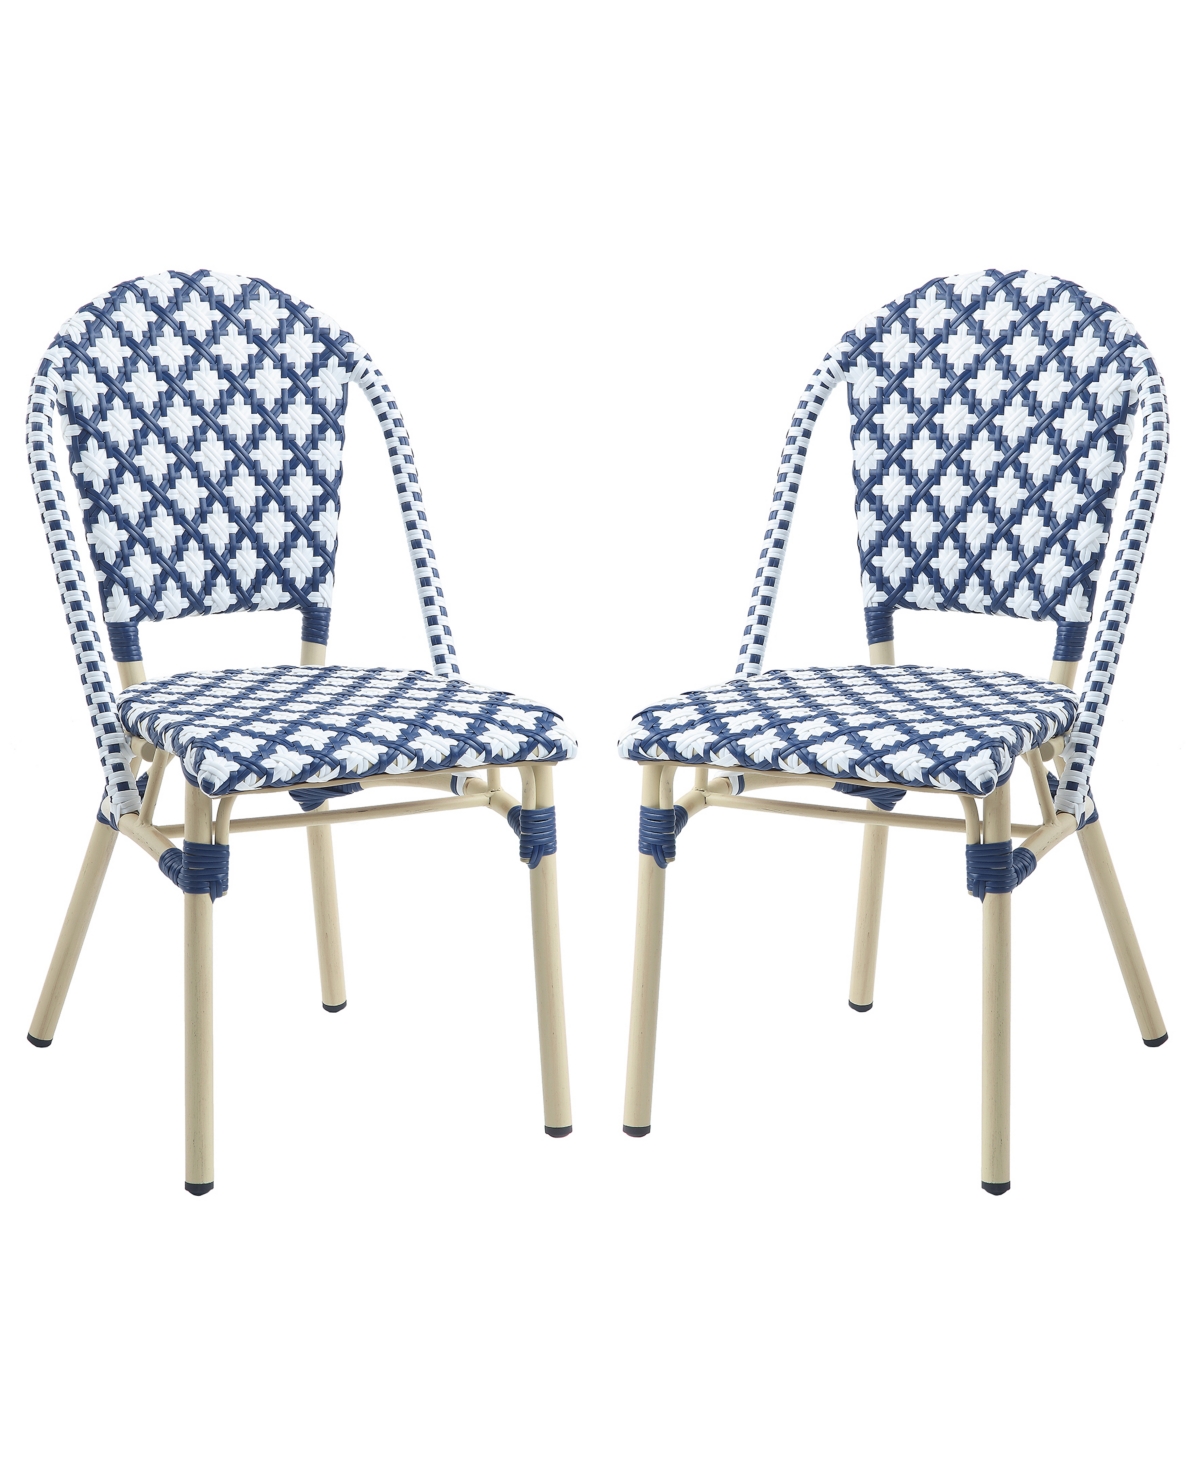 Furniture Of America Petraes Patio Chair Set, 2 Piece In Navy,white,natural Tone